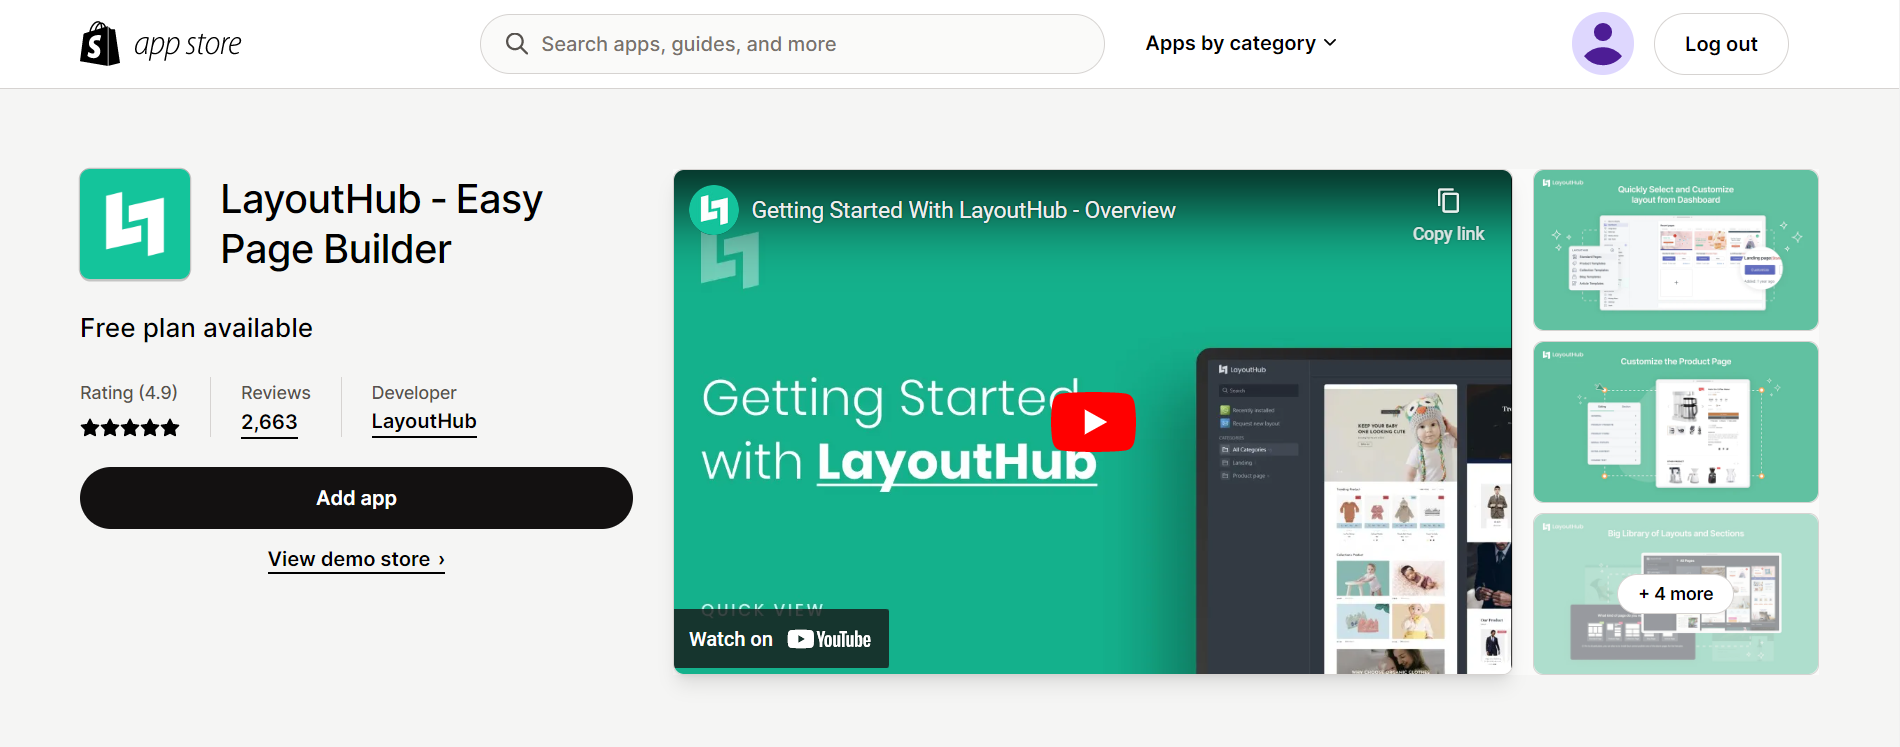 LayoutHub ‑ Easy Page Builder Shopify app  